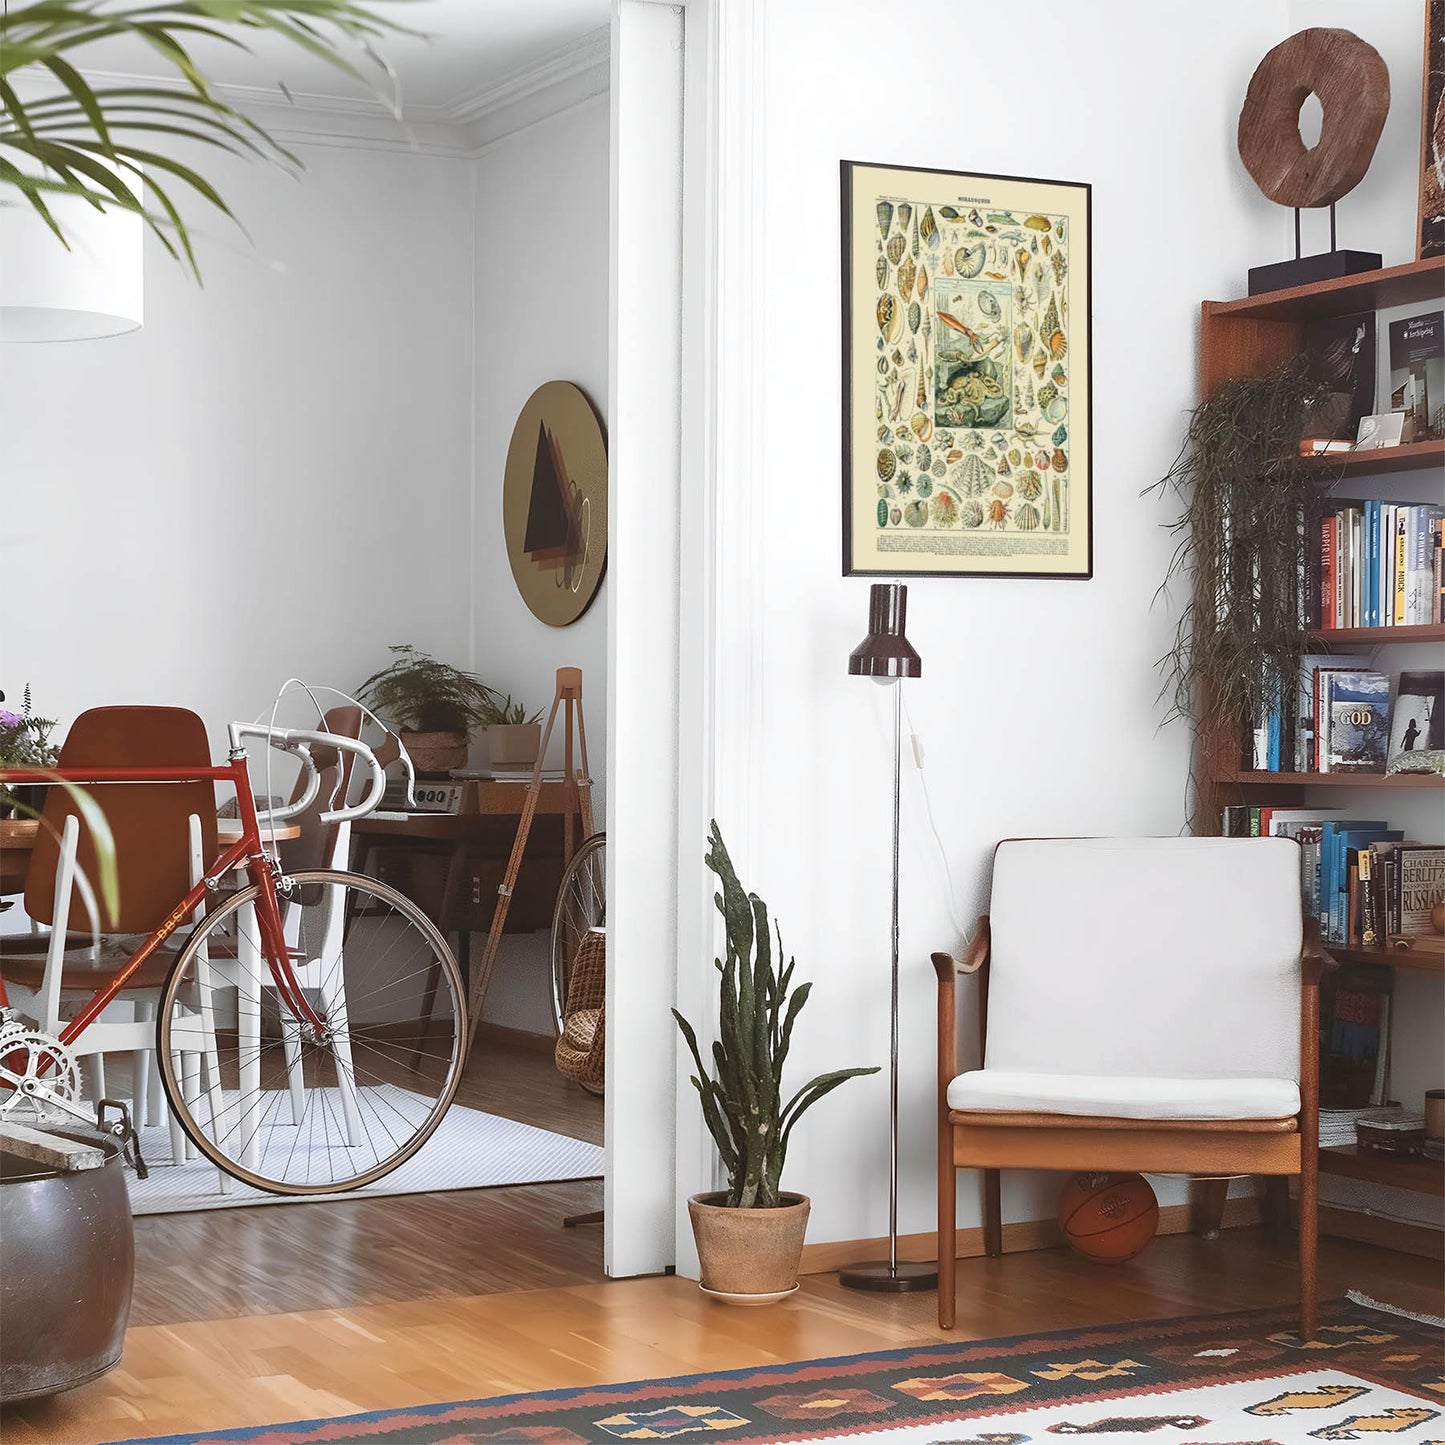 Eclectic living room with a road bike, bookshelf and house plants that features framed artwork of a Ocean Life and Shells above a chair and lamp